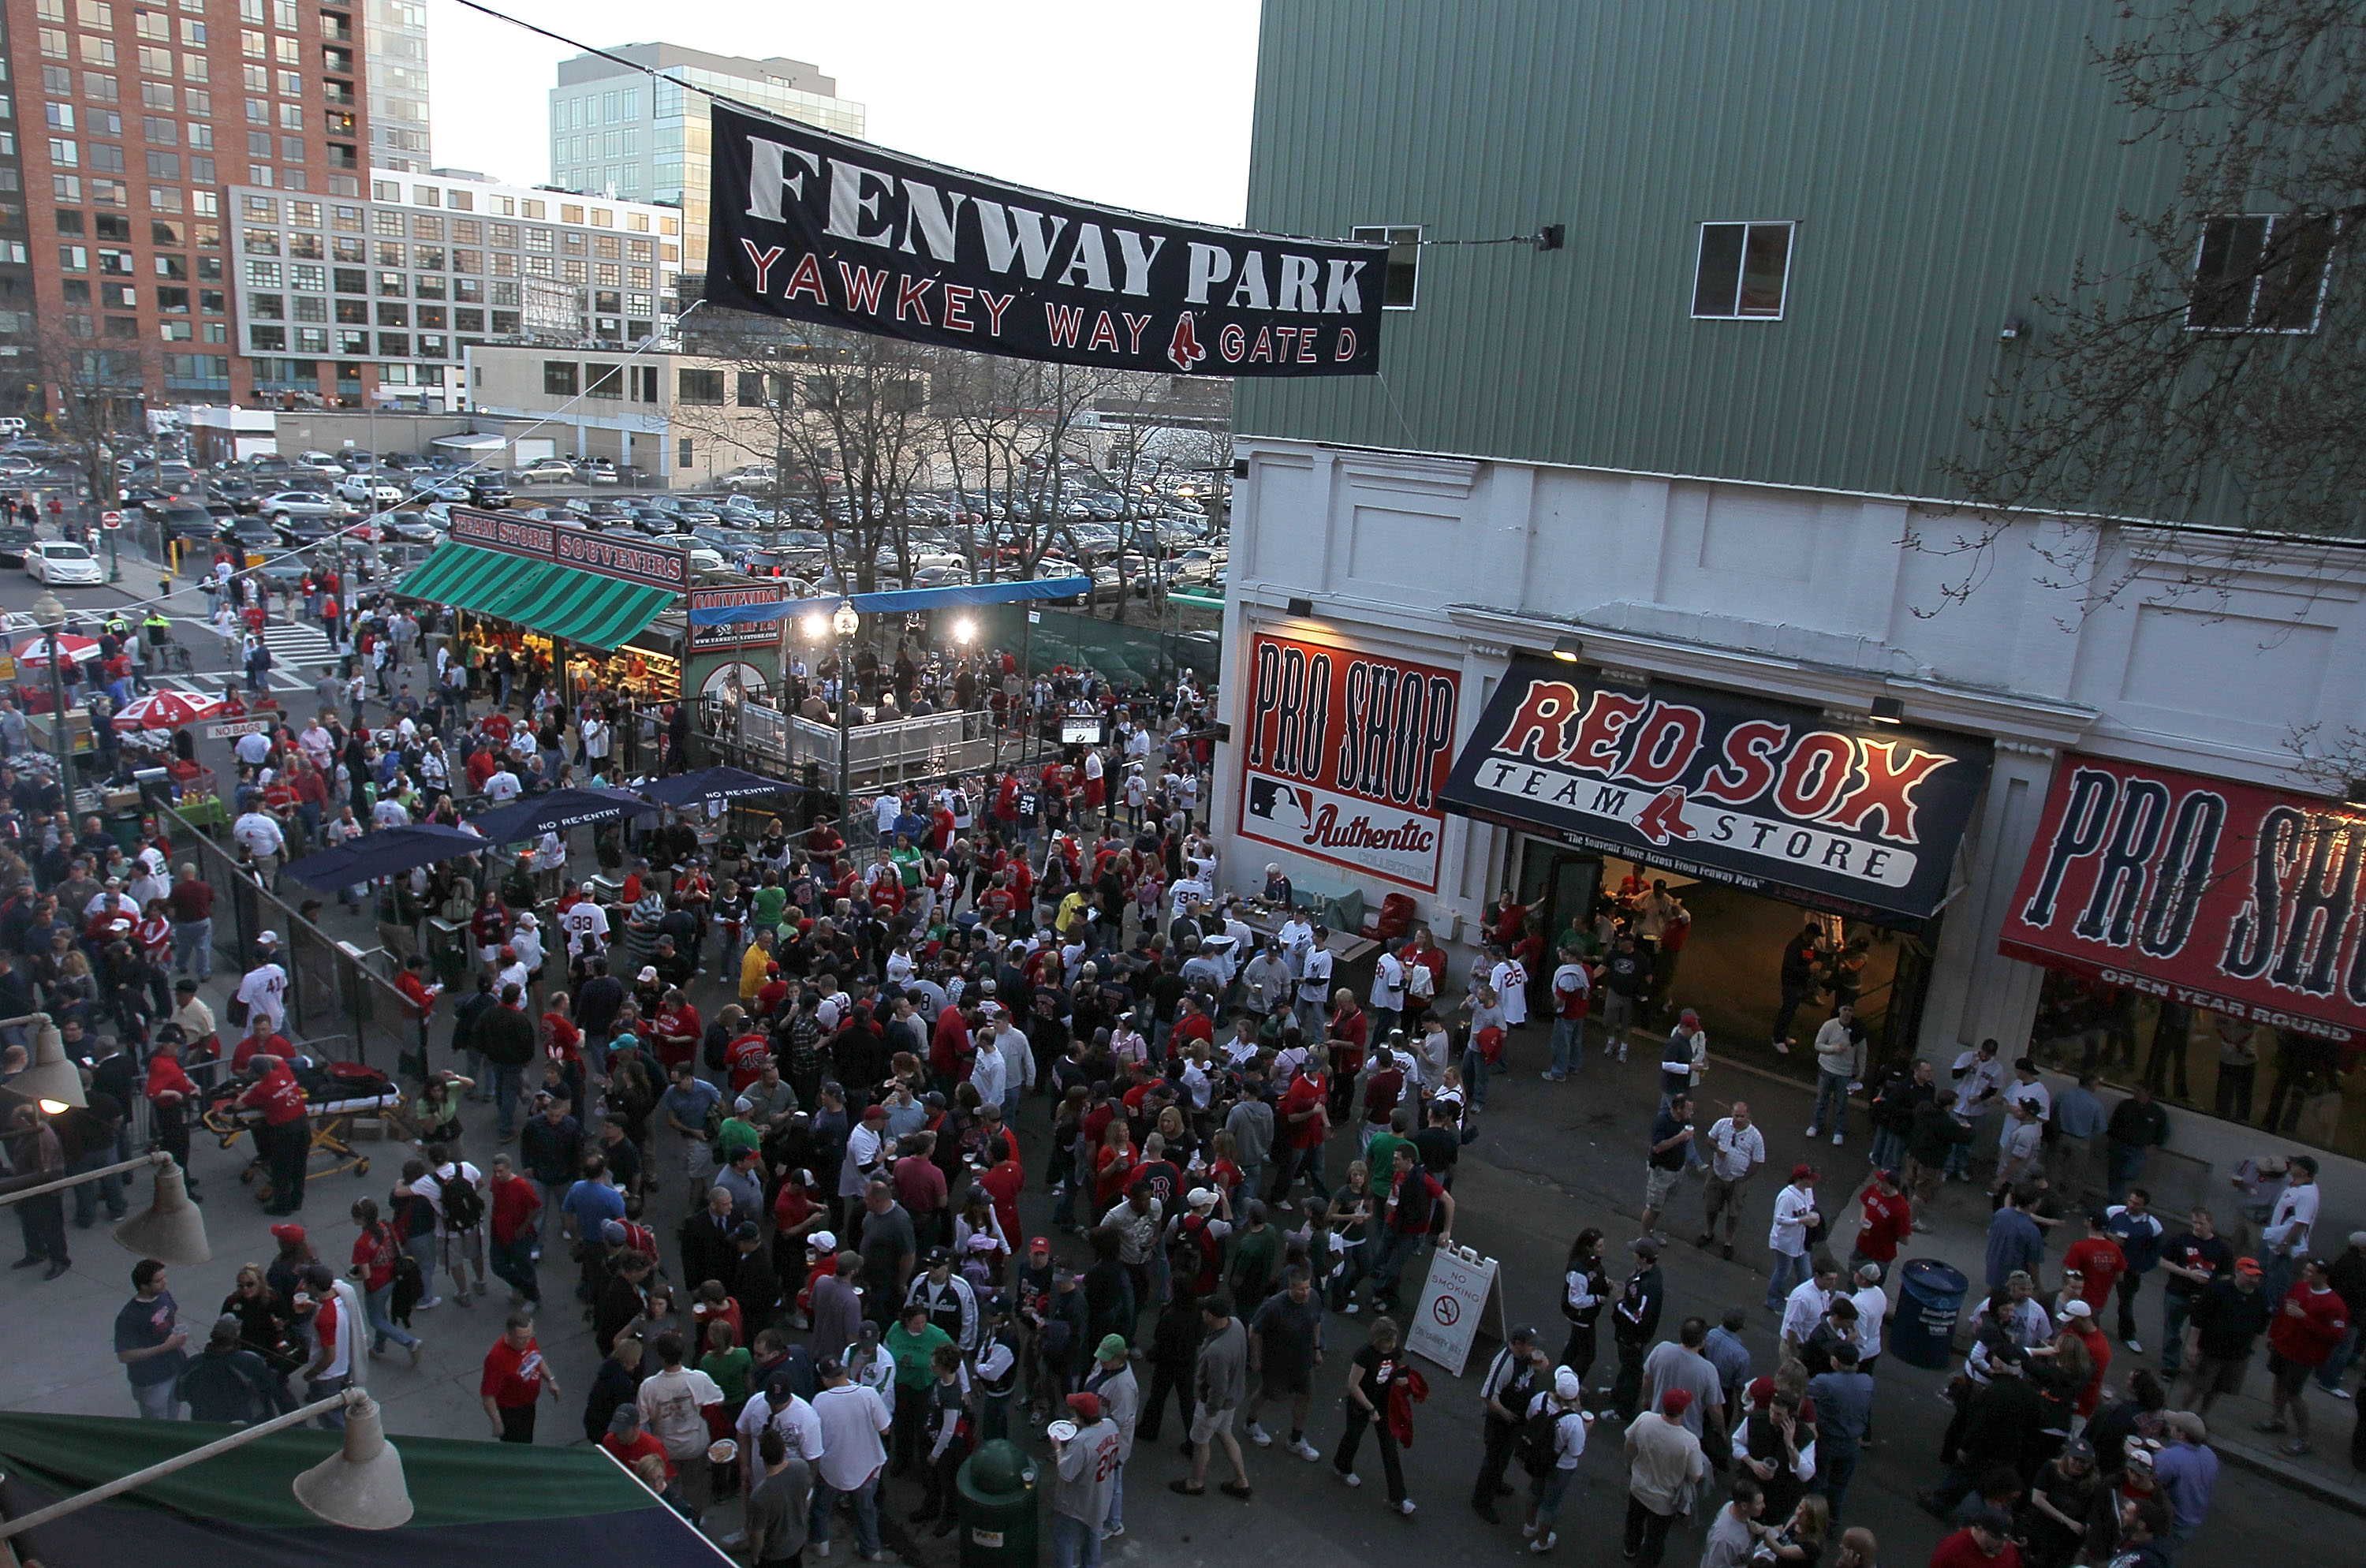 BOSTON - APRIL 04: Fans enter Yawkey Way before a game between the Boston Red Sox and the New York Yankees on Opening Night at Fenway Park on April 4, 2010 in Boston, Massachusetts. (Photo by Jim Rogash/Getty Images)